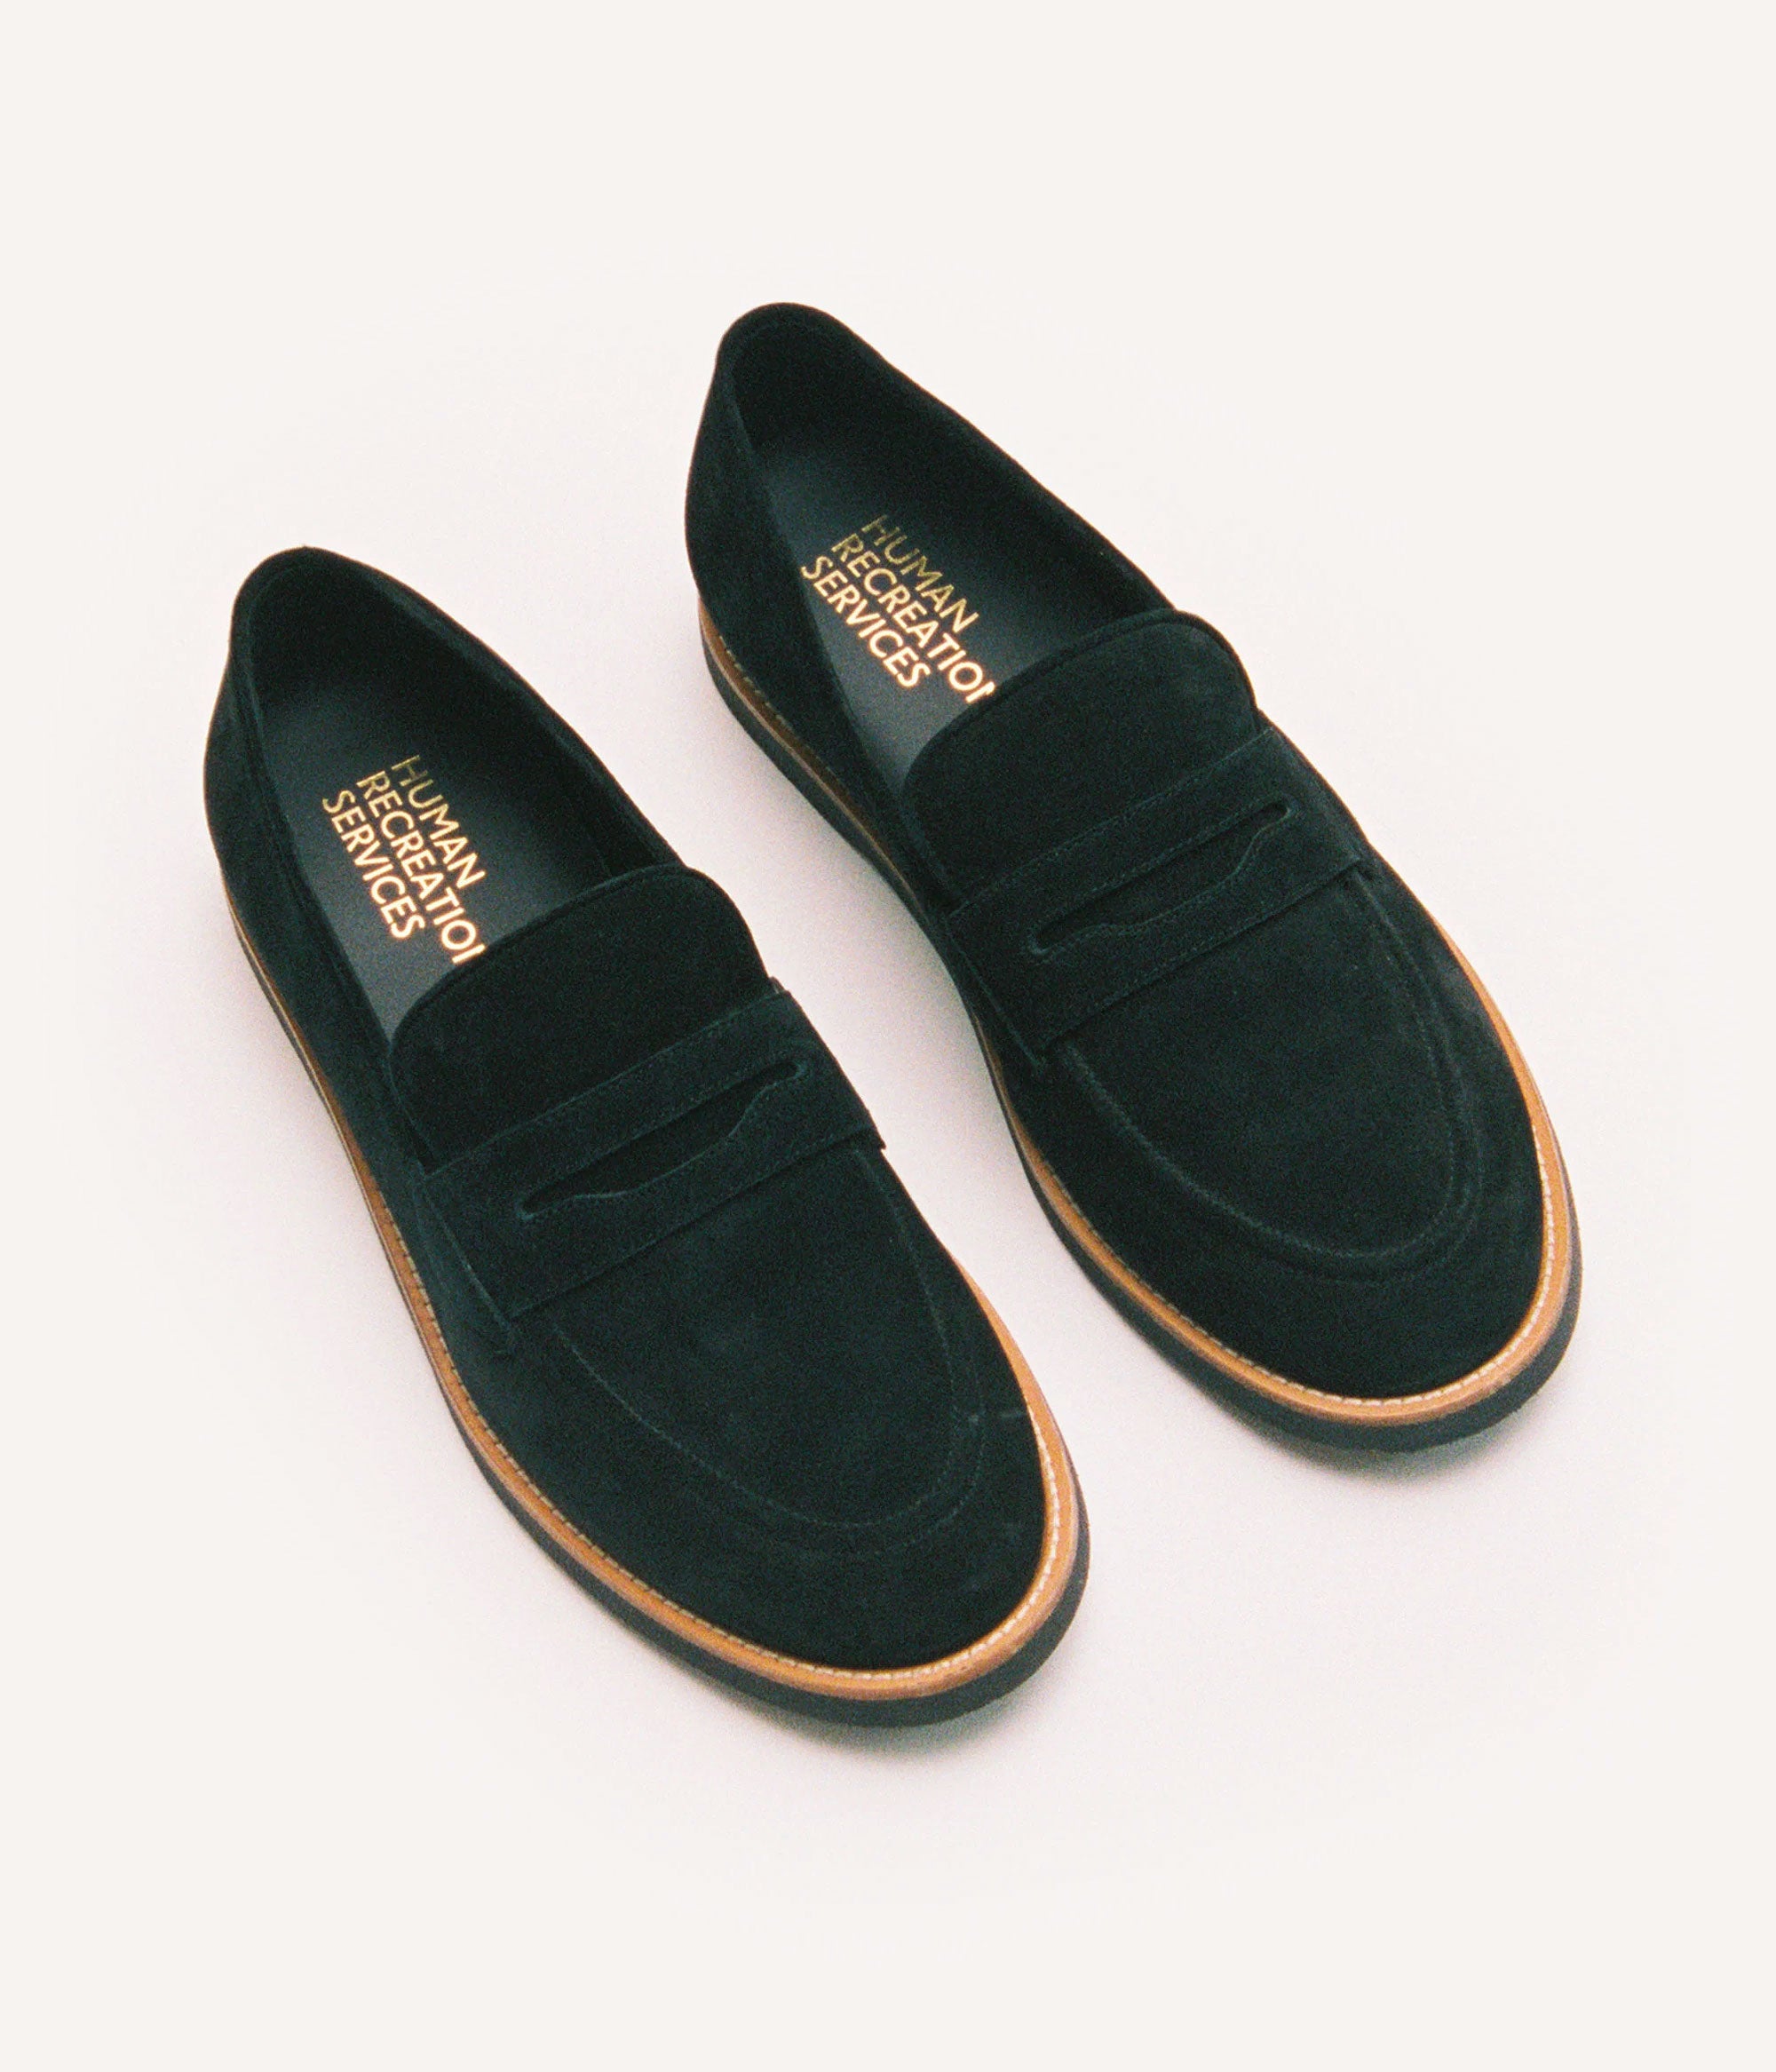 HUMAN RECREATIONAL SERVICES DEL REY SMOKE PENNY LOAFER IN ITALIAN SUEDE 